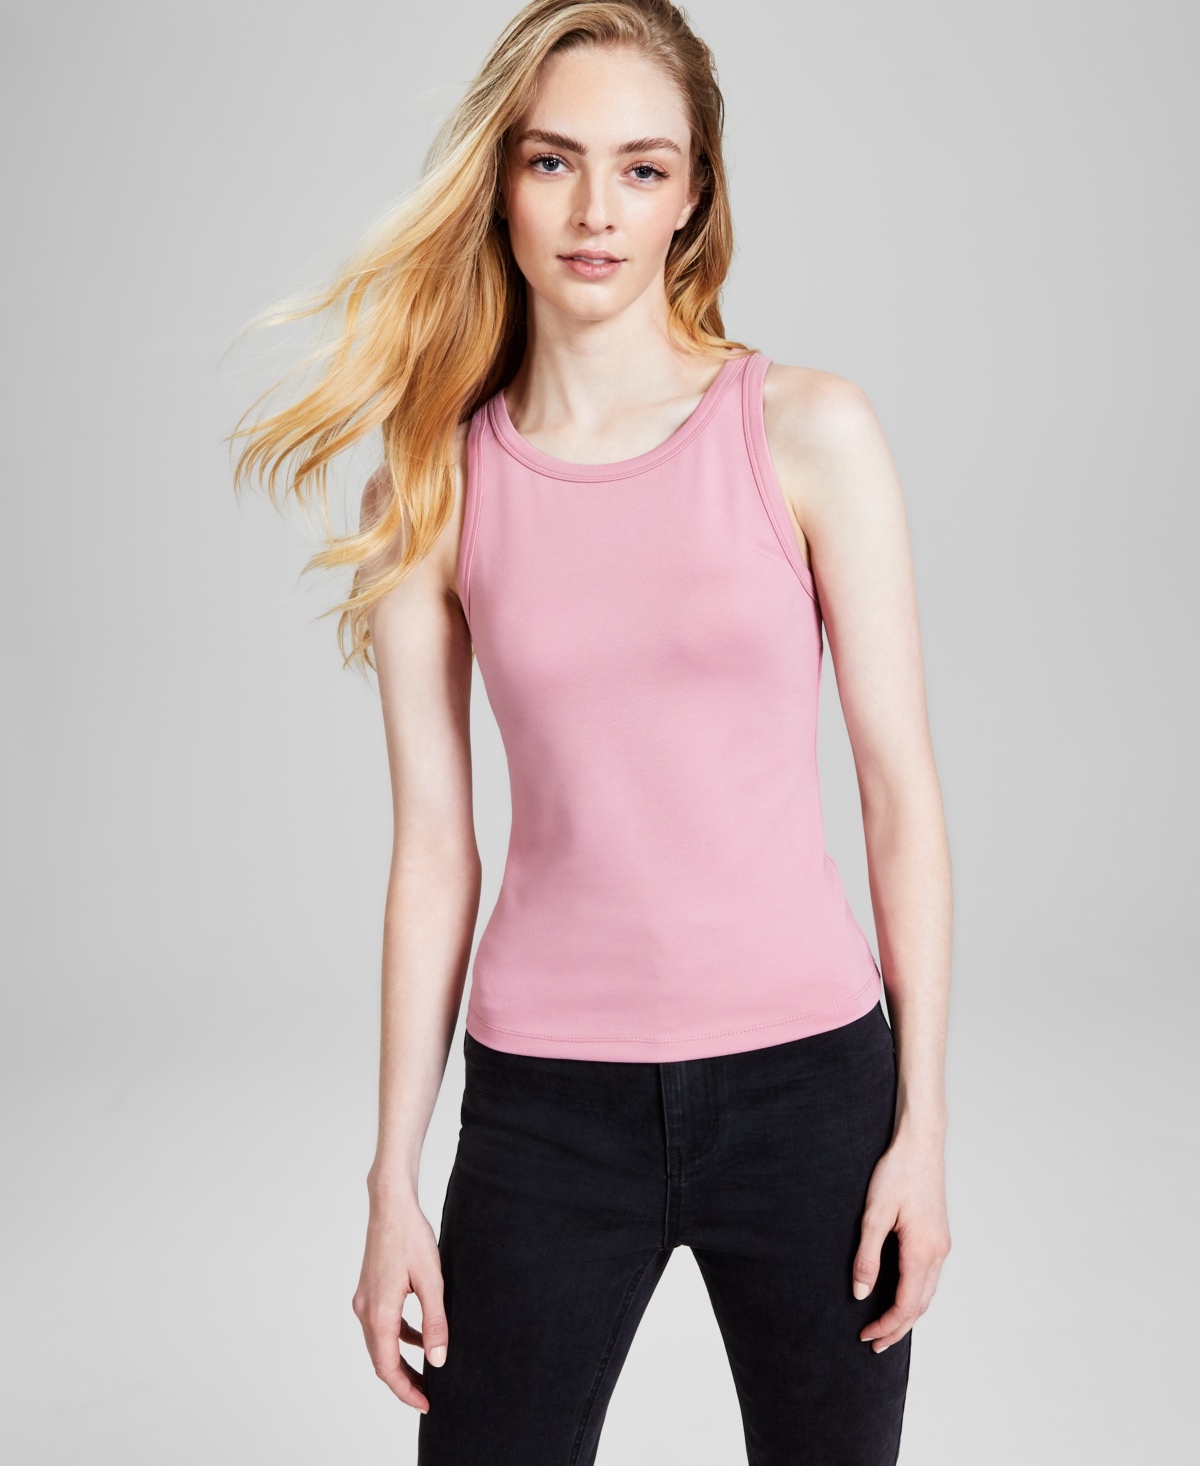 Women's Sleeveless Top, Created for Macy's - Green Pond